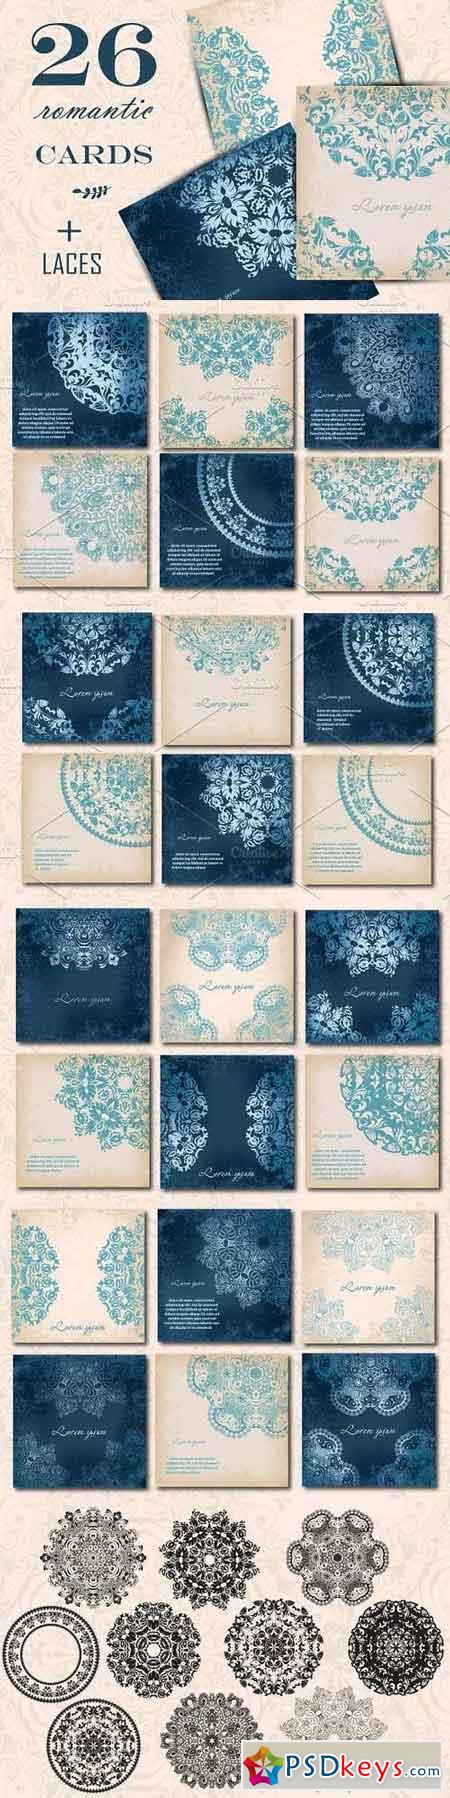 Rownd Lace Cards 553296